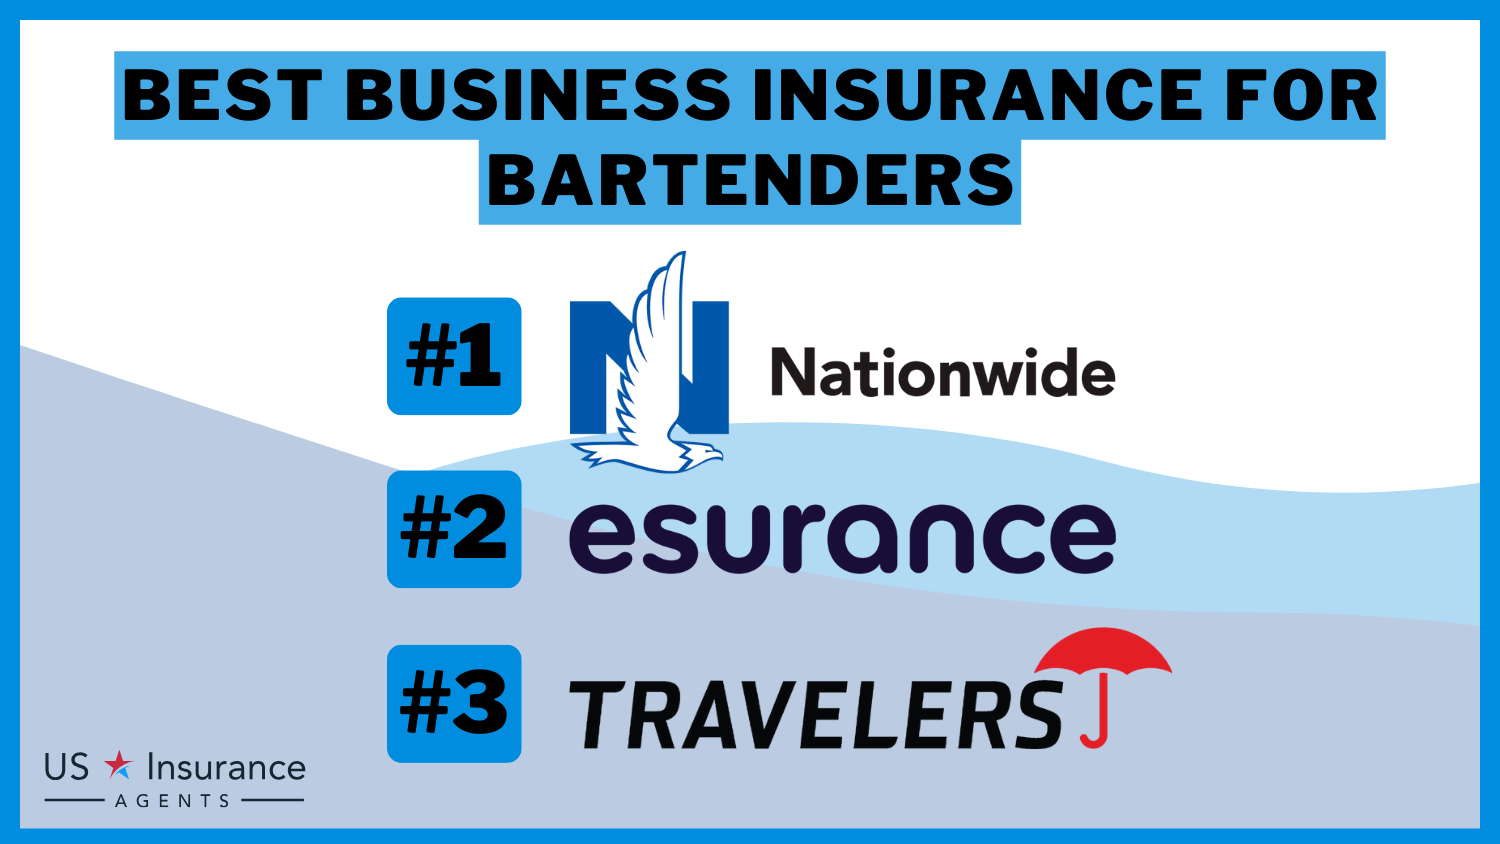 Best Business Insurance for Bartenders: Nationwide, Esurance and Travelers.